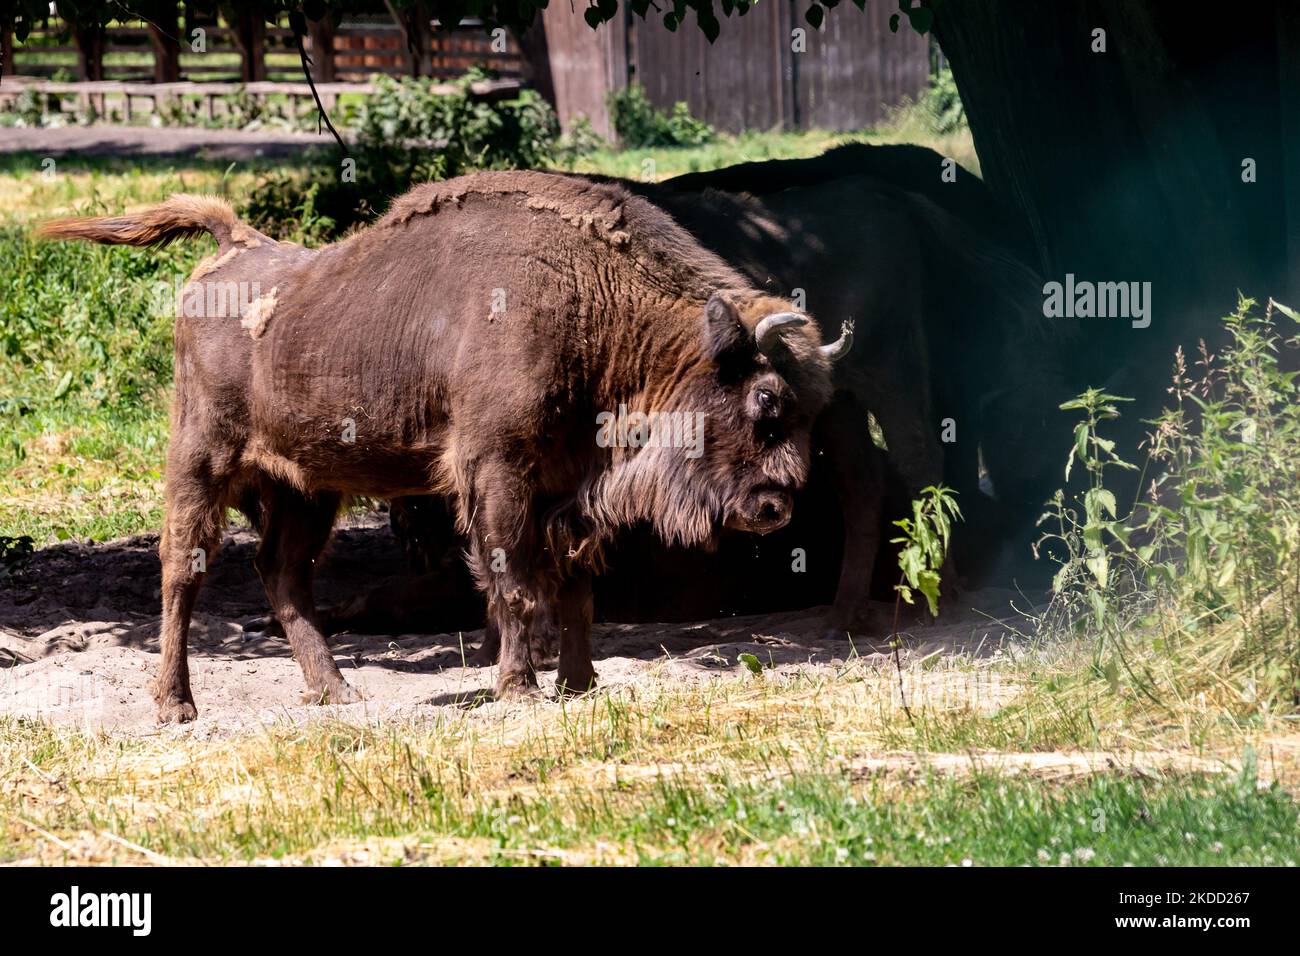 European Bisons, largest European animal, today present only in Bialowieza Forests are seen resting in natural reserve park as Bialowieza National Park is fully open for tourist for the first time since September 2021 when Poland prohibited entering the zone near Belarus border - July 1, 2022 in Bialowieza, Poland. The ban was lifted as Poland build a 186 kilometer long and 5.5 meter high steel barrier with barbed wire on the Polish - Belarus border, which is as well the border of the European Union and NATO. The decision was made after thousands of migrants, mainly from Syria, Iraq and Afghan Stock Photo